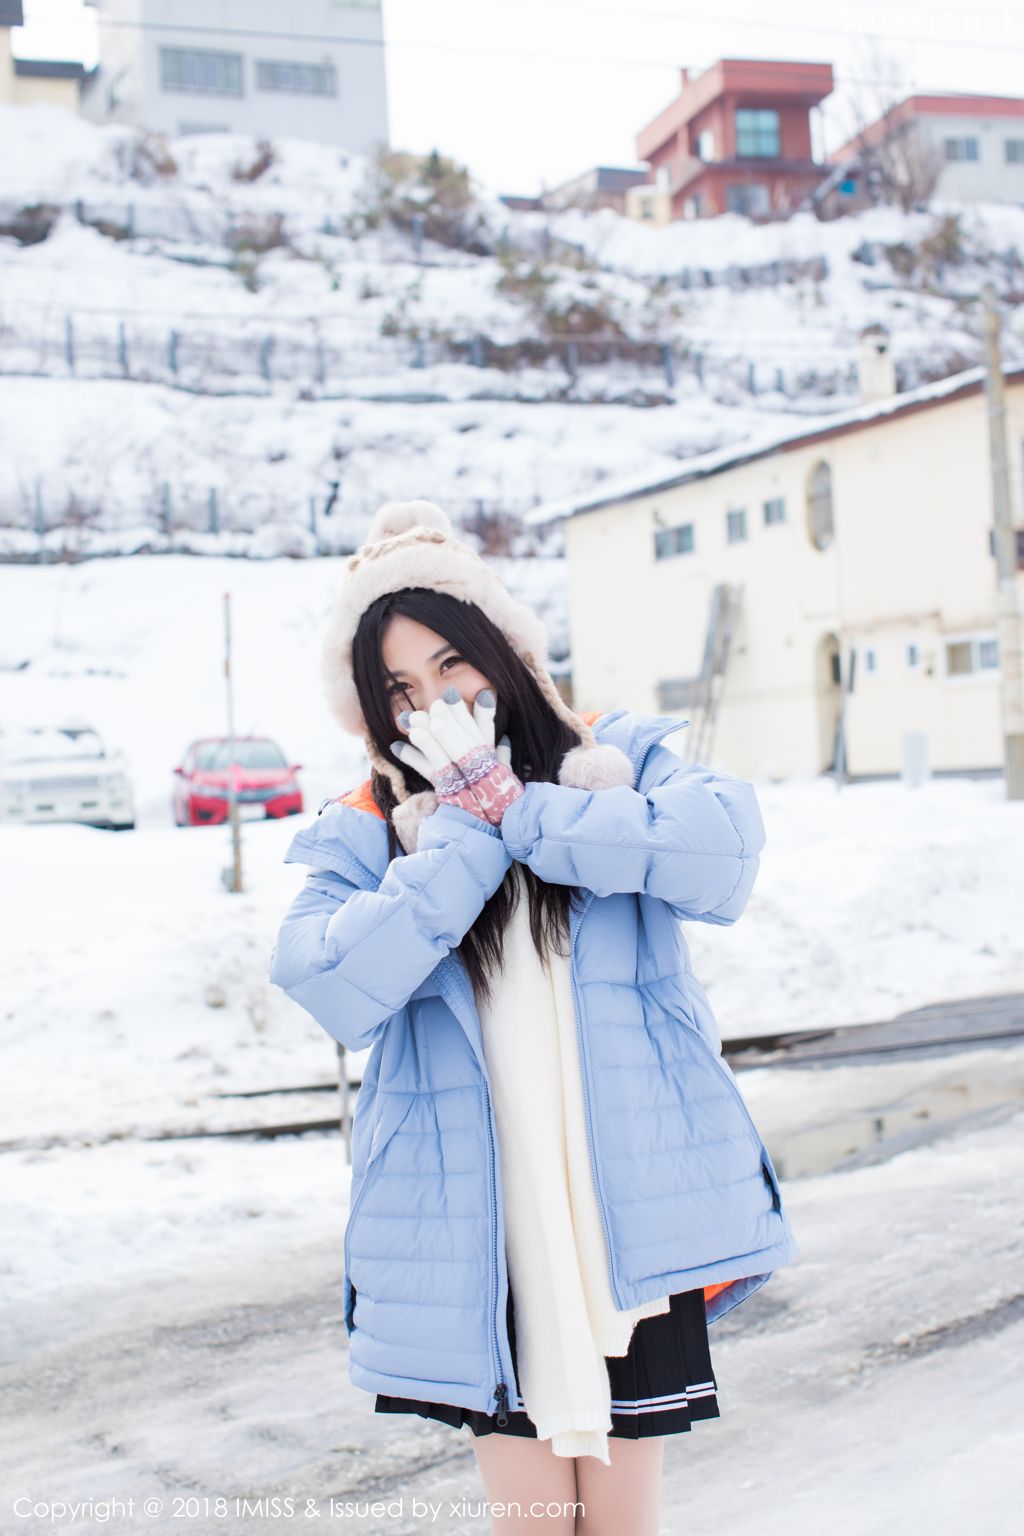 Image-IMISS-Vol.262-Sabrina model–Xu-Nuo-许诺-Sparkling-White-Snow-TruePic.net- Picture-25